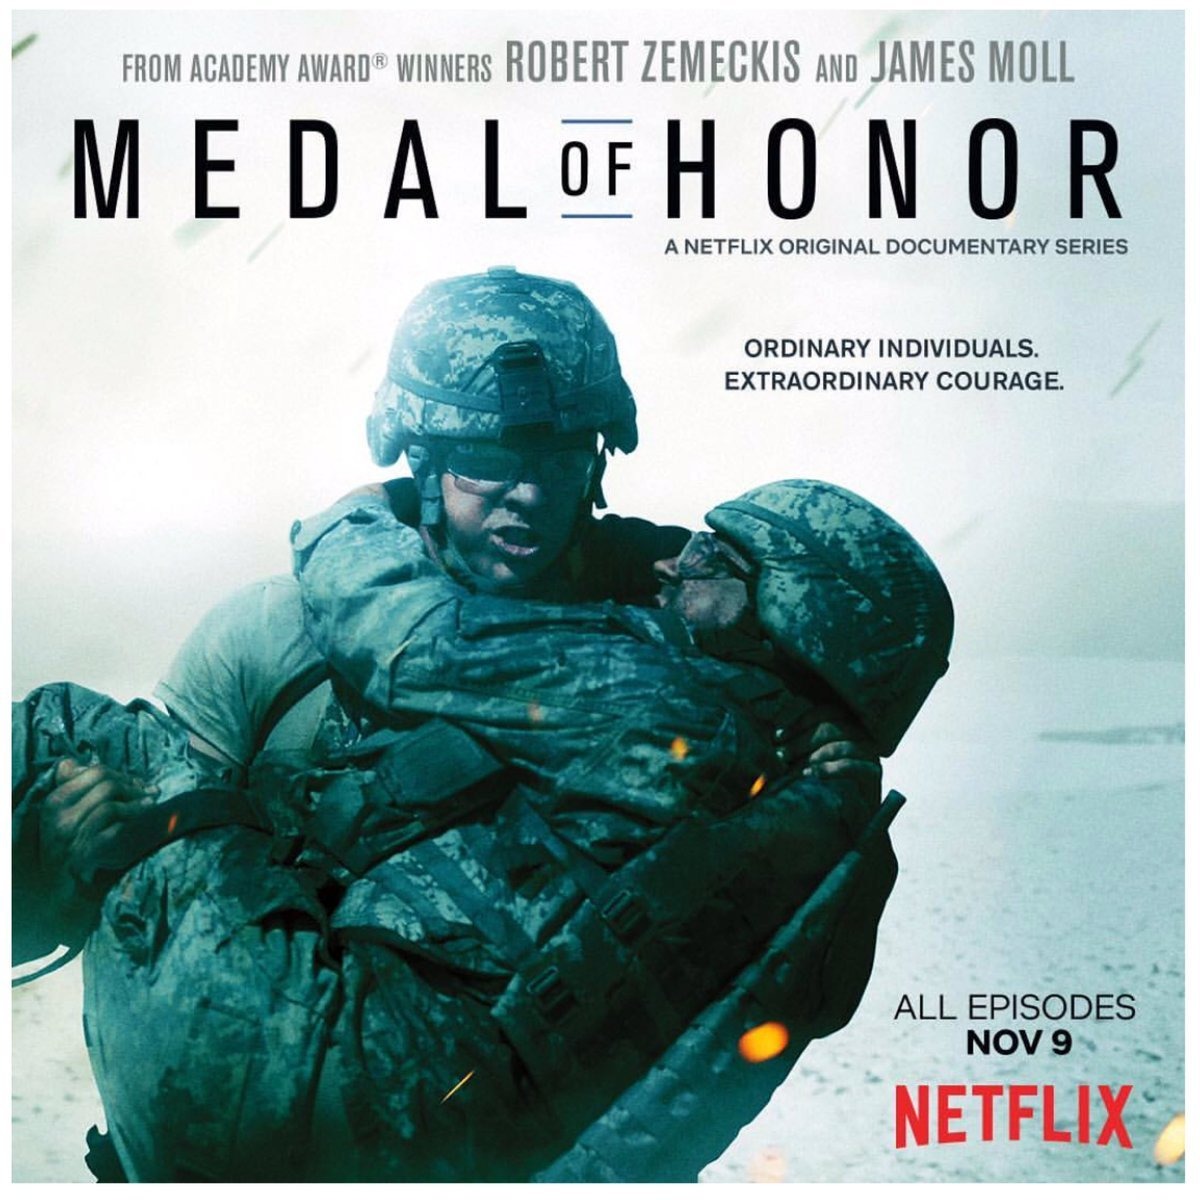 Extra Large TV Poster Image for Medal of Honor 